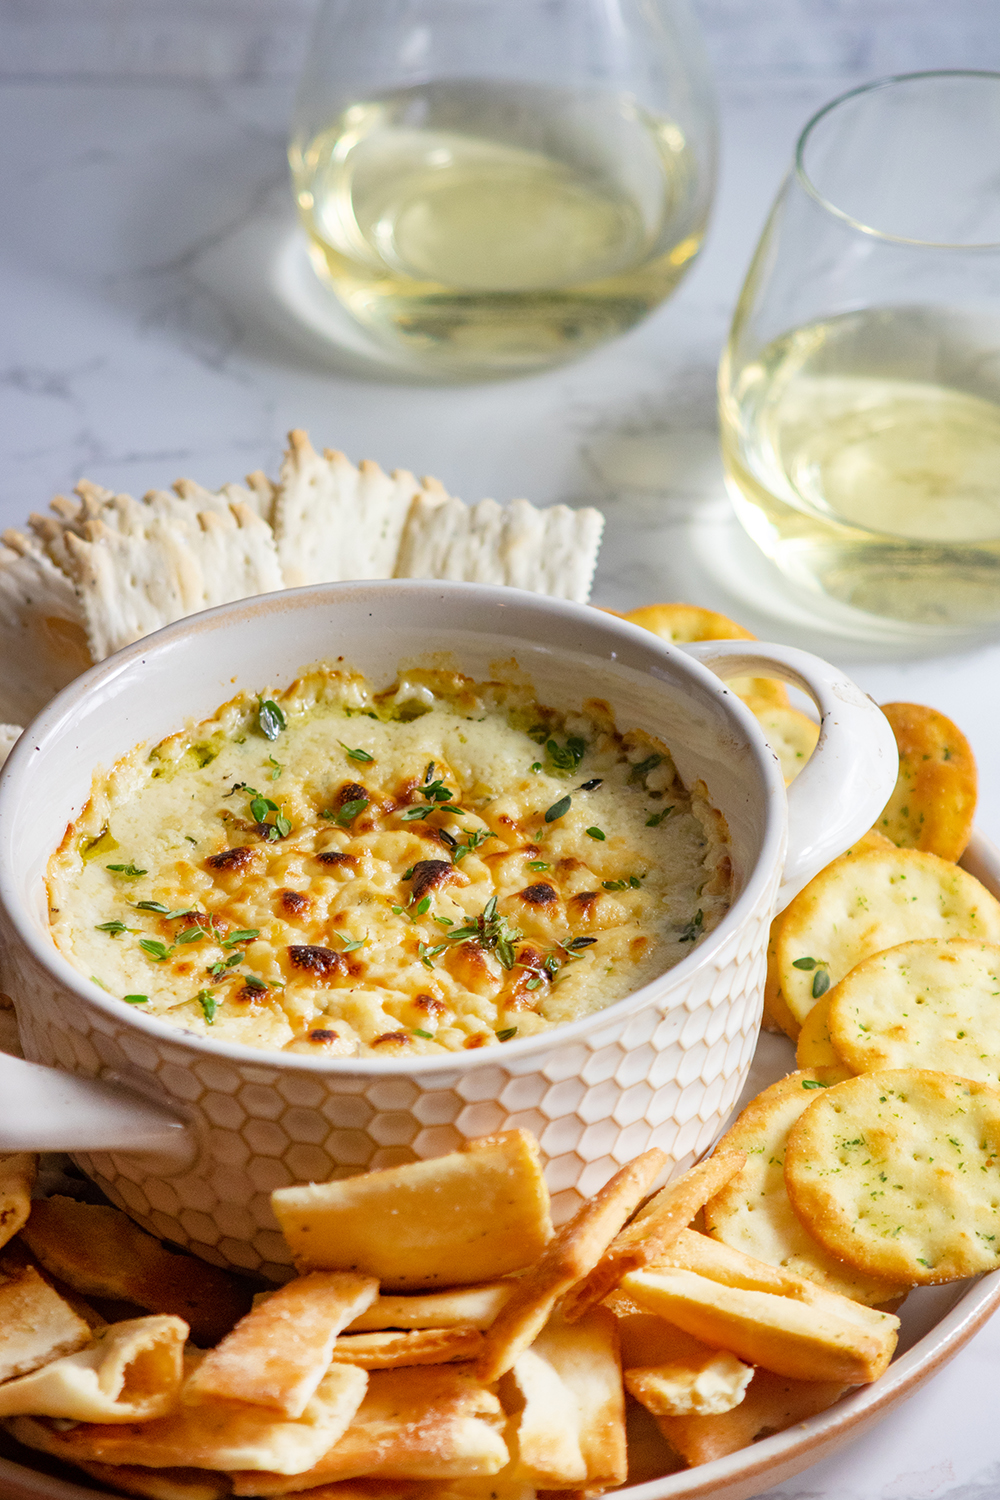 Baked Goat Cheese And Ricotta Dip